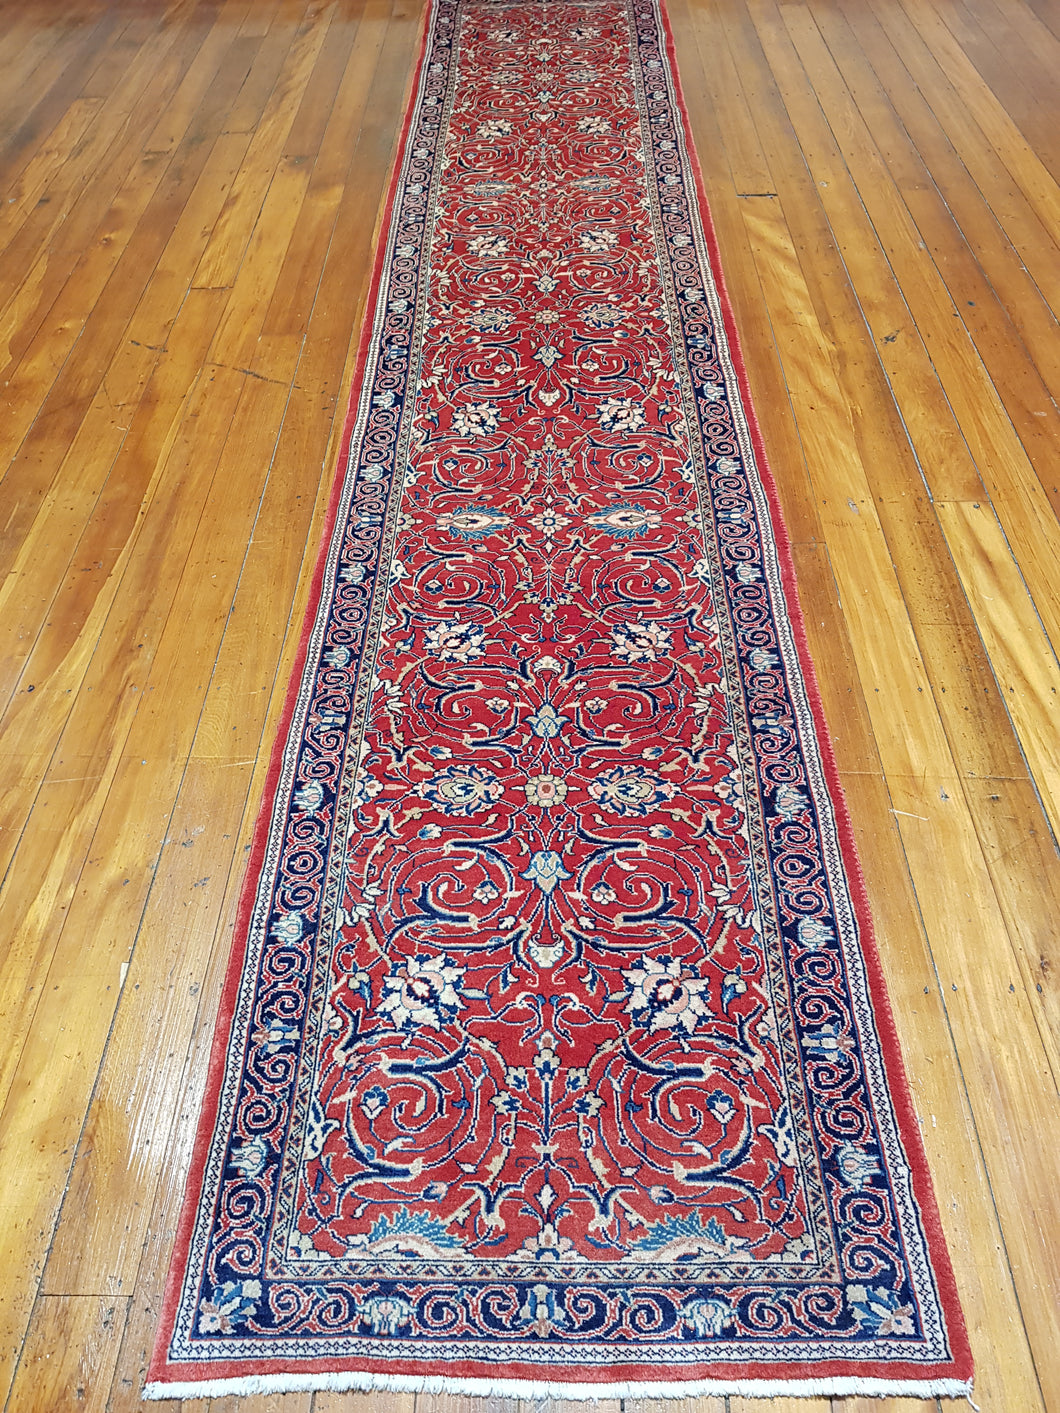 Hand knotted wool Rug 14590 size  423 x 80 cm, Iran